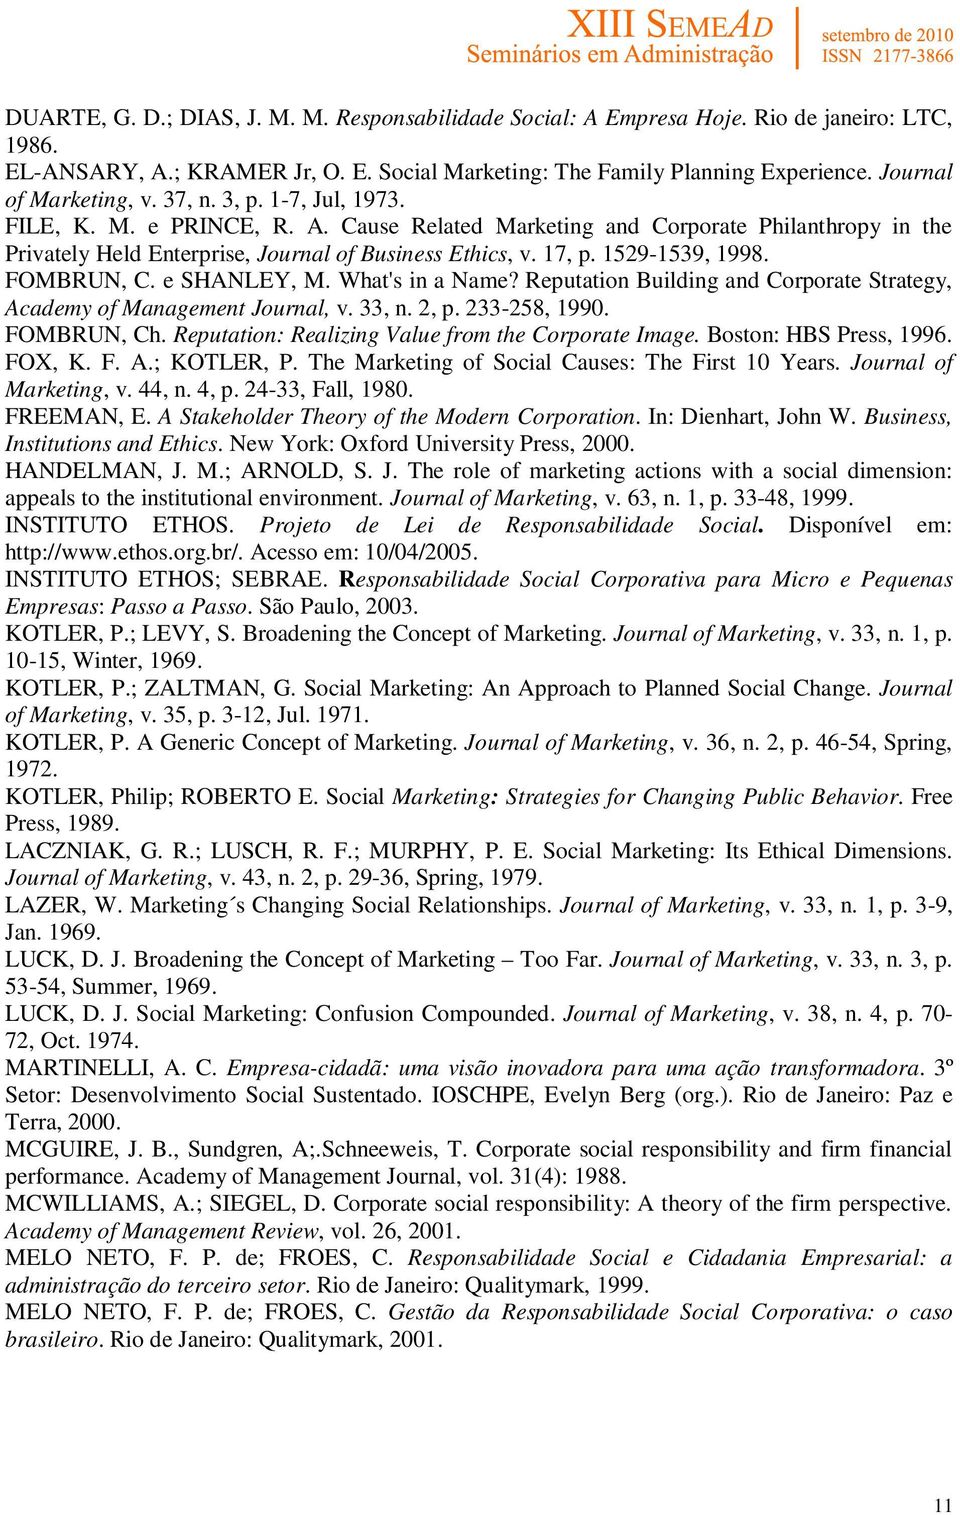 17, p. 1529-1539, 1998. FOMBRUN, C. e SHANLEY, M. What's in a Name? Reputation Building and Corporate Strategy, Academy of Management Journal, v. 33, n. 2, p. 233-258, 1990. FOMBRUN, Ch.